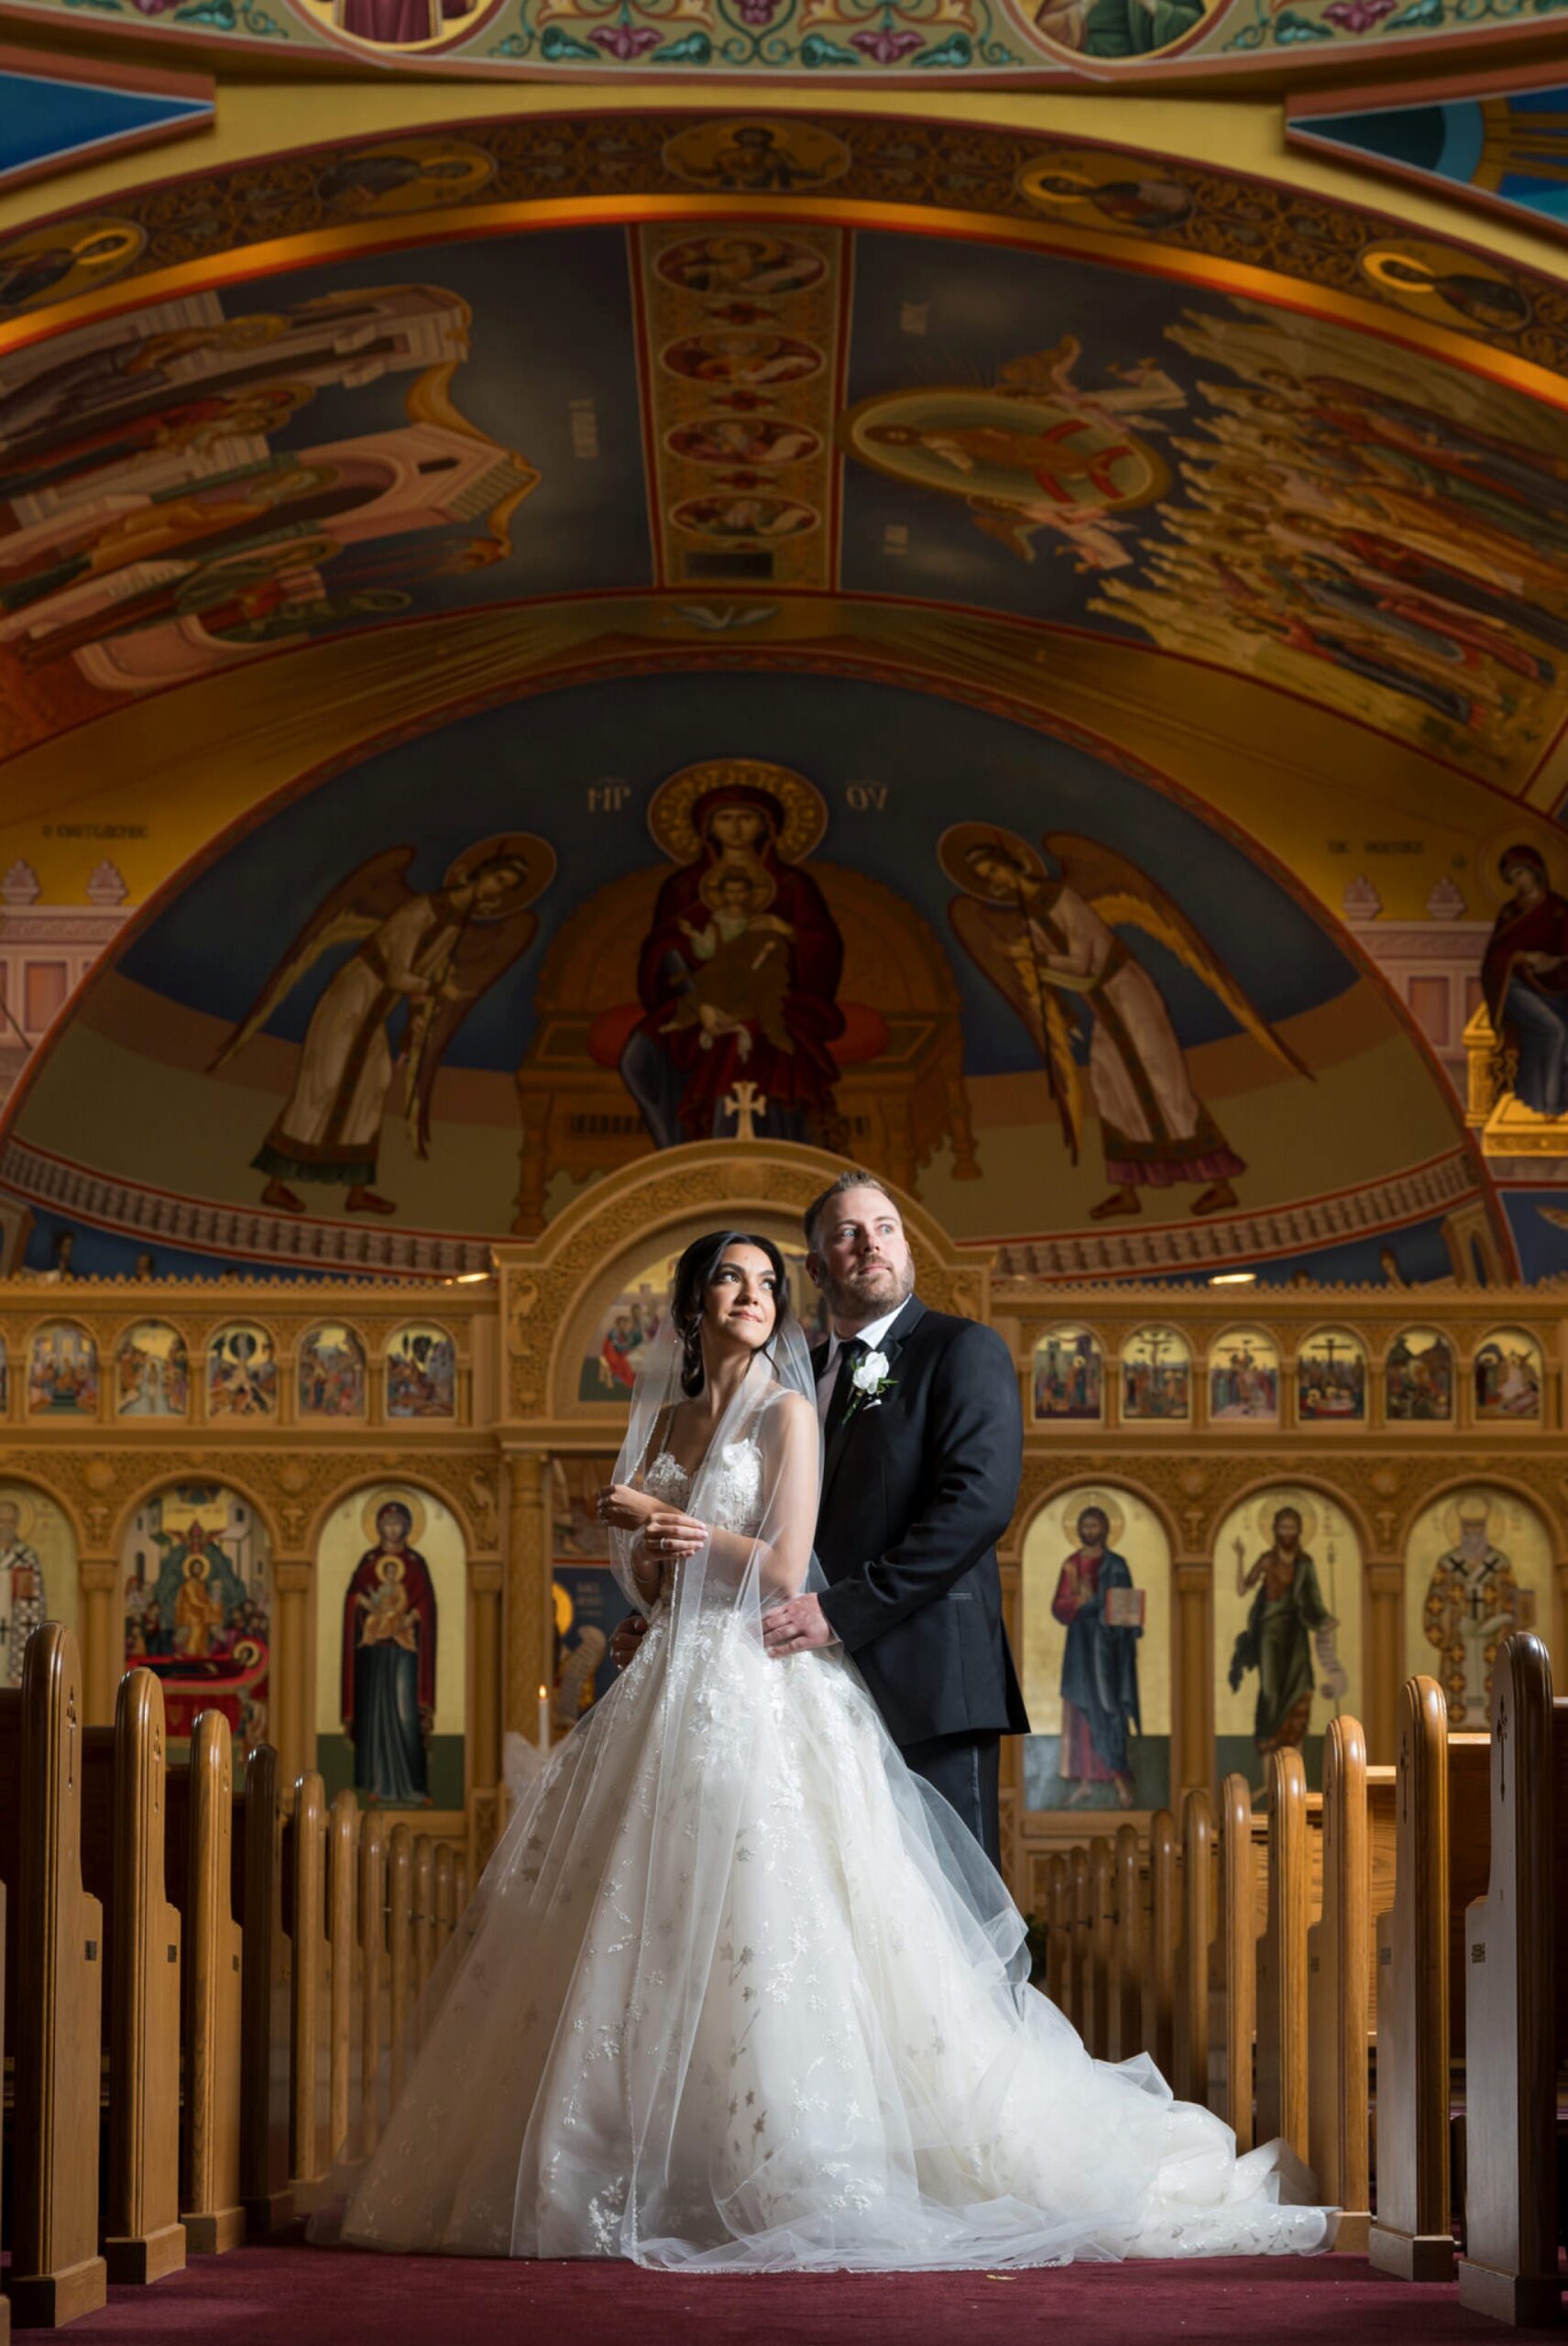 The bride and groom pose in the center aisle of an Assumption Greek Orthodox wedding.